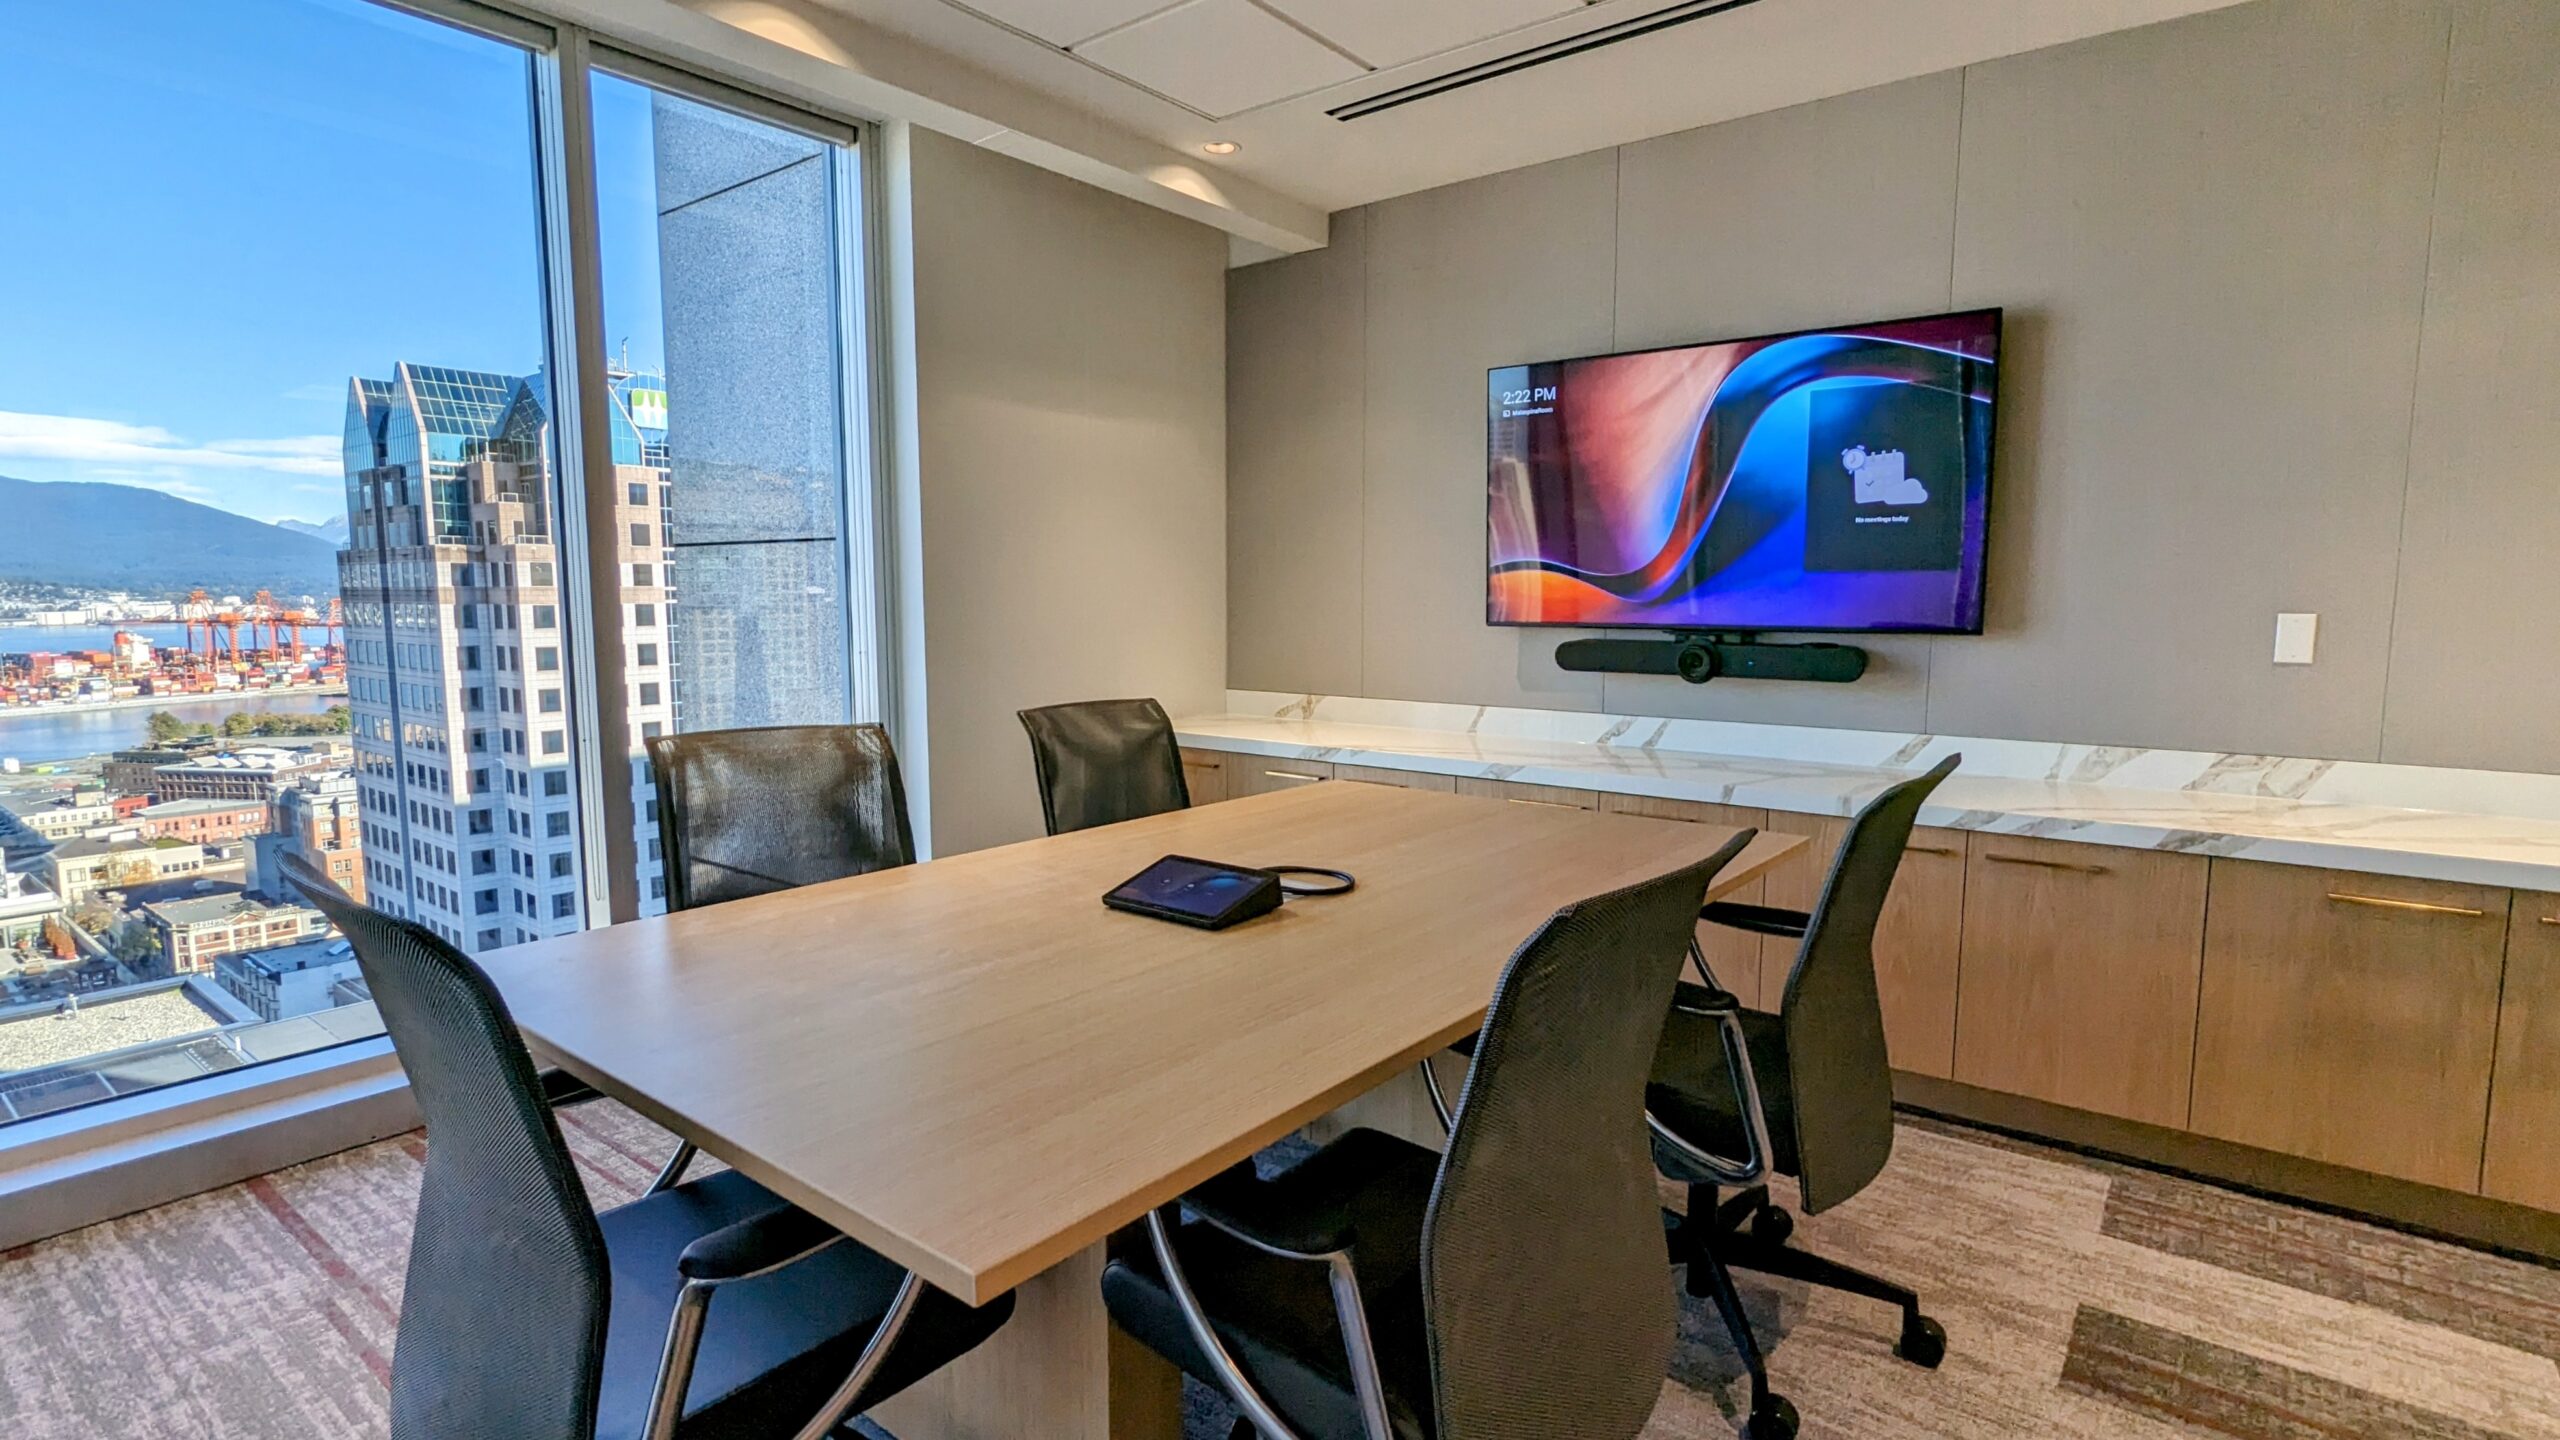 Malaspina Meeting Room at LK Law's new downtown Vancouver office - featuring video conferencing AV solutions from Logitech.